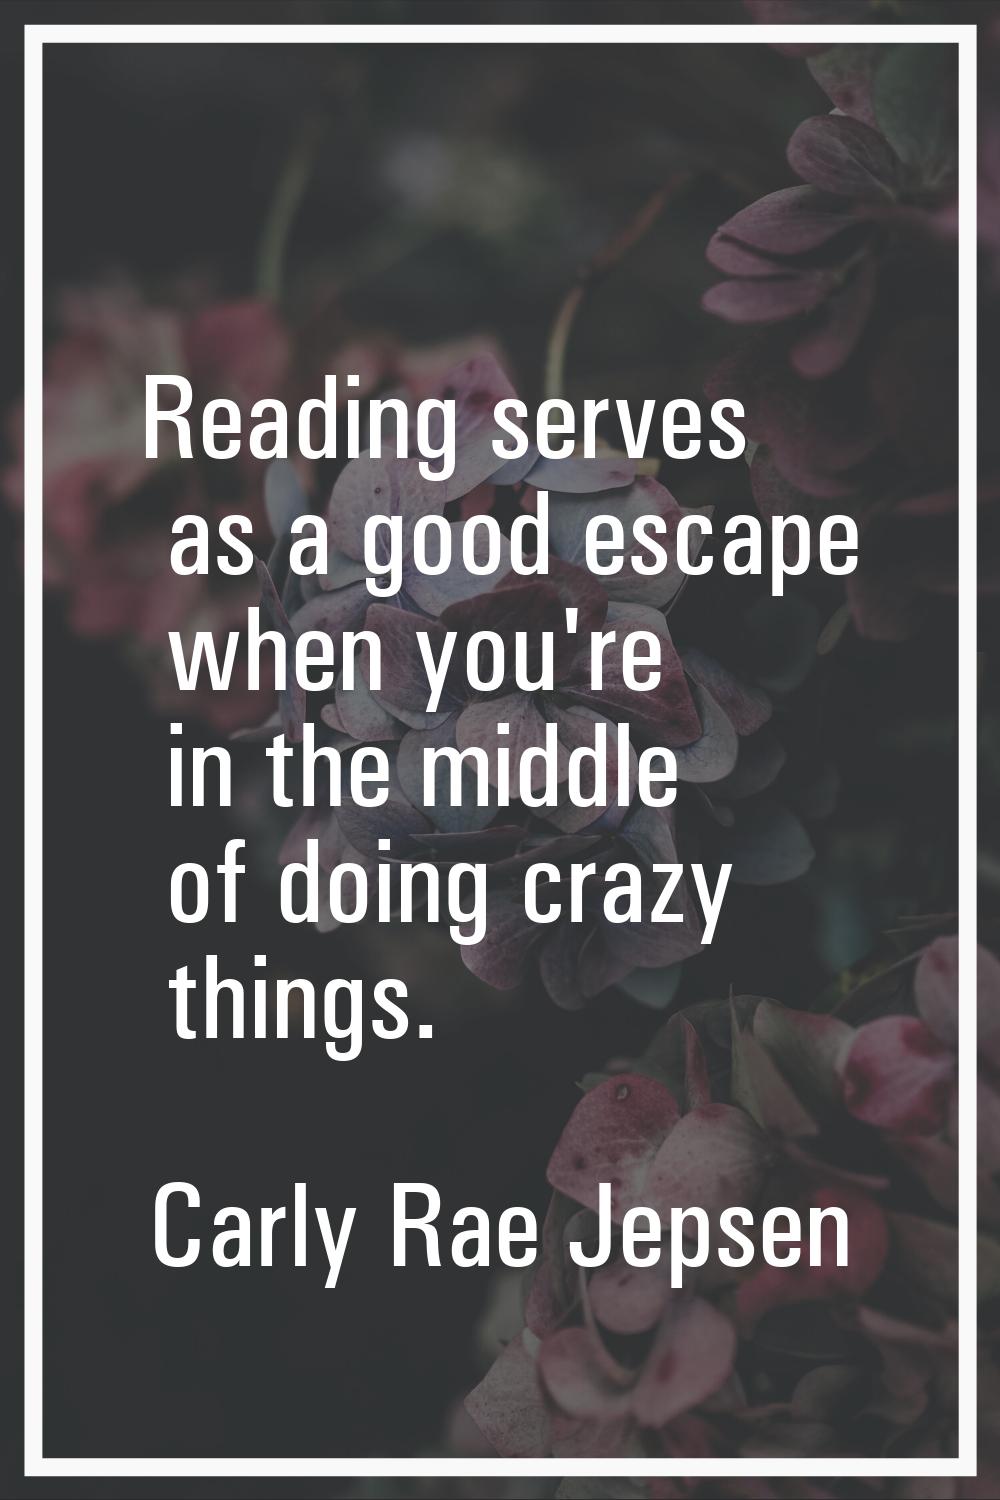 Reading serves as a good escape when you're in the middle of doing crazy things.